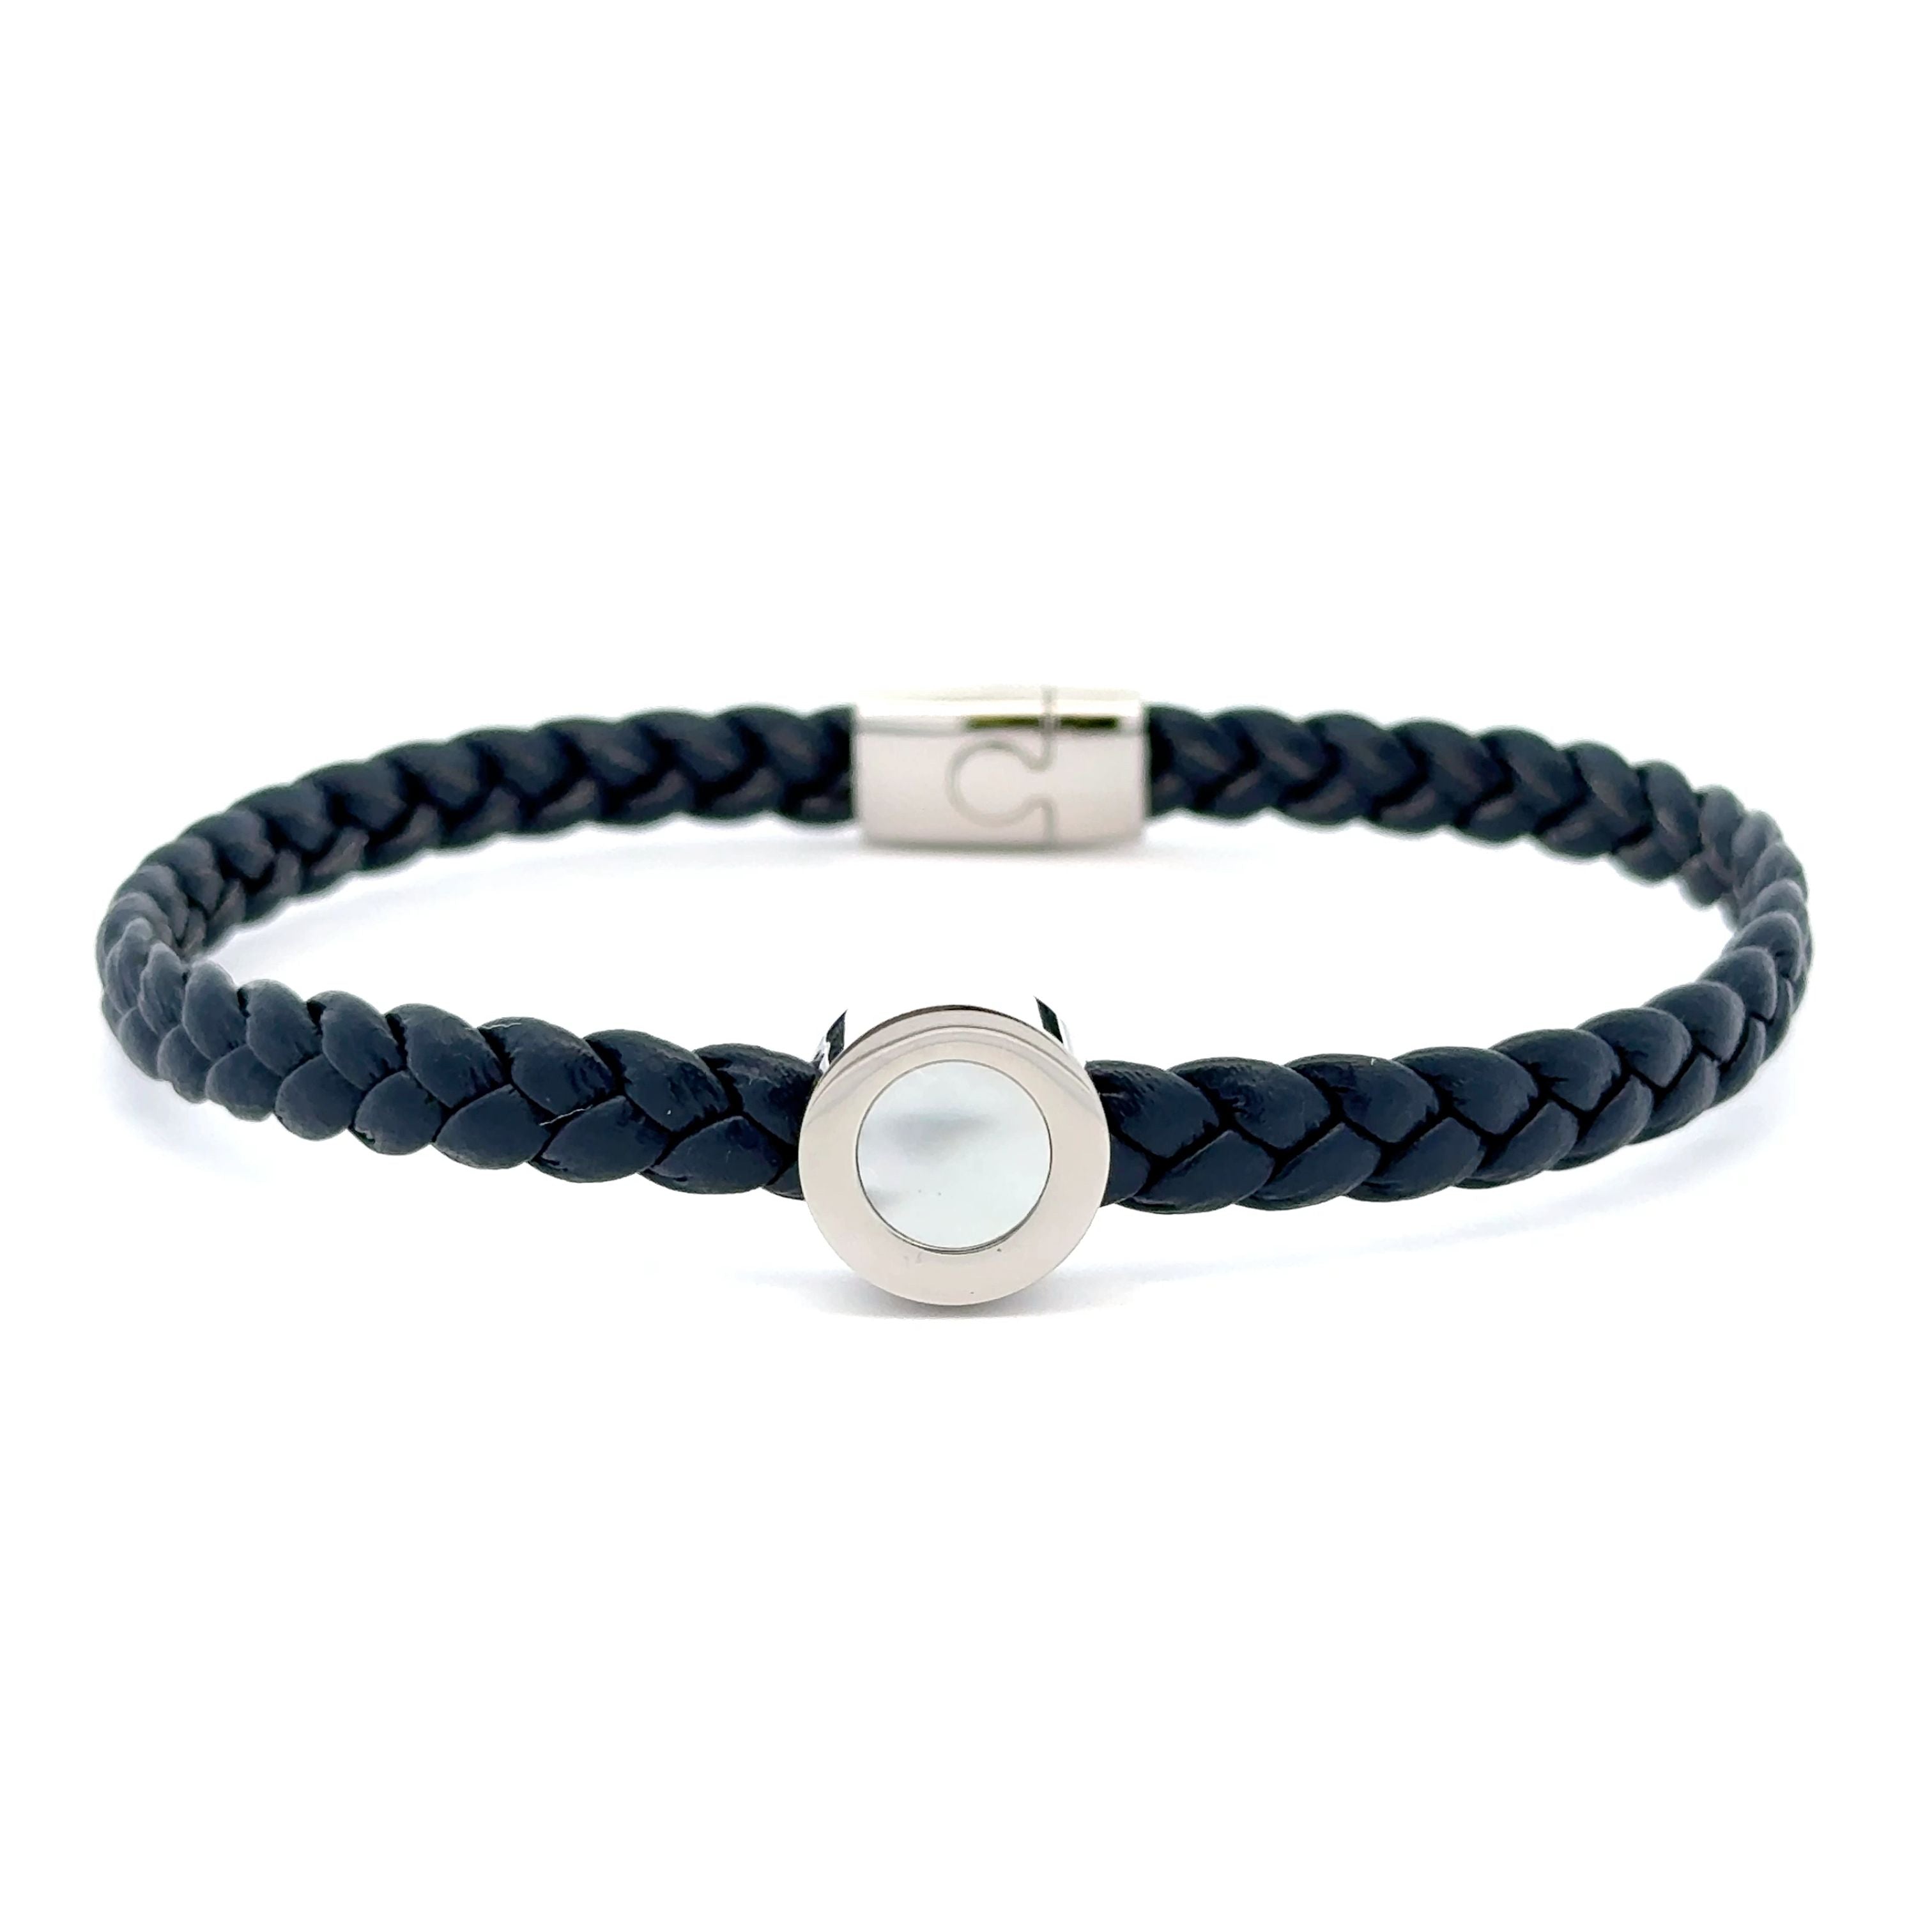 Stainless Steel Braided Blue Leather Bracelet with White Mother of Pearl